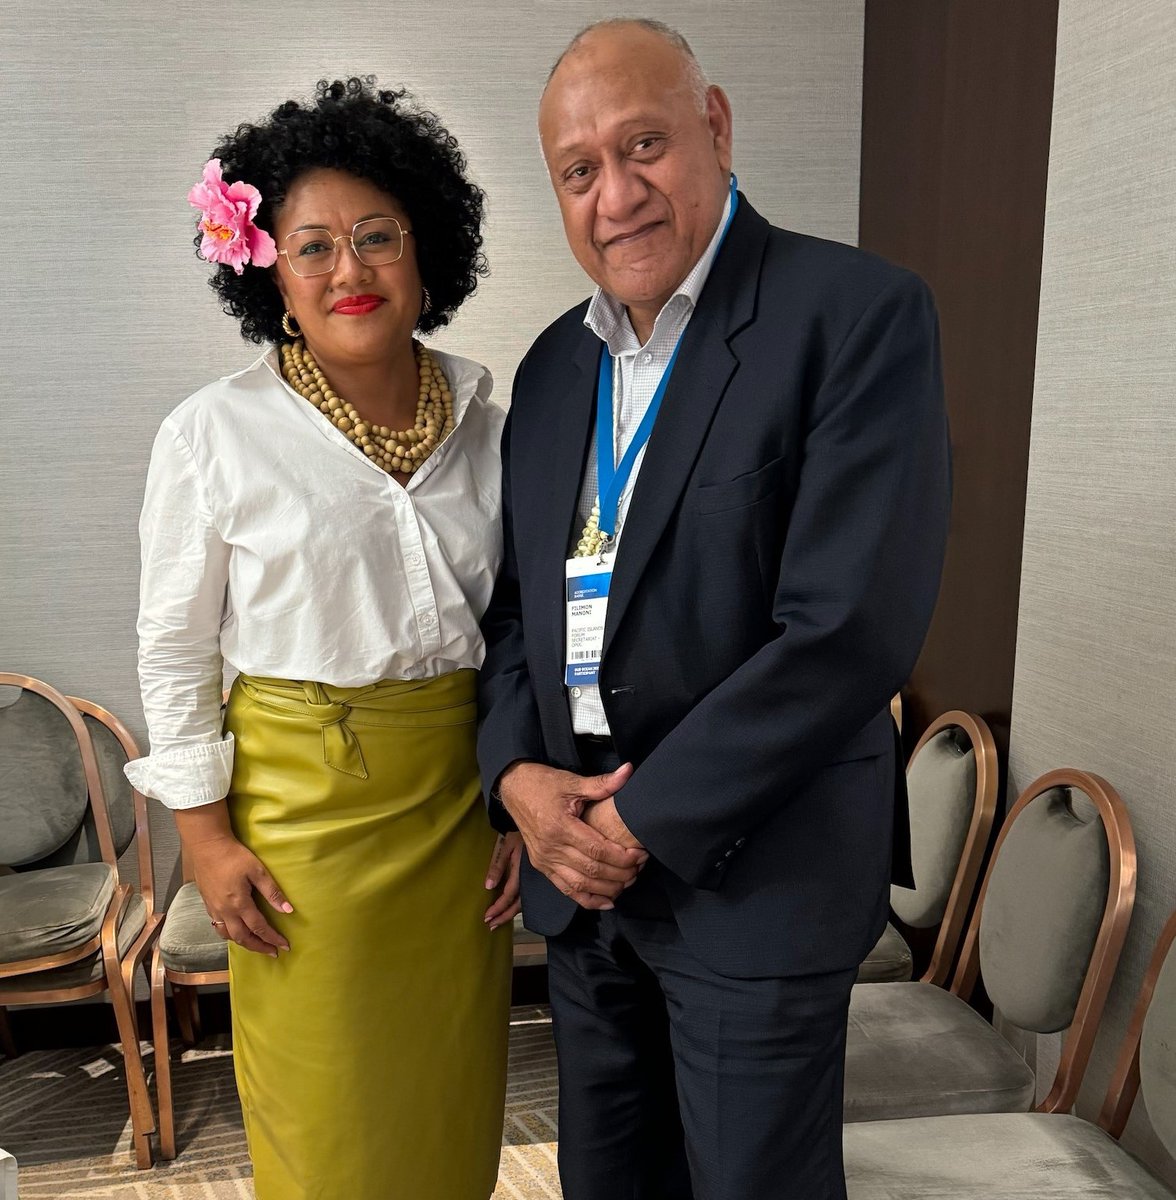 Pacific Ocean Commissioner Dr Filimon Manoni met #europeancommission Director General on Maritime Affairs and Fisheries Charlina Vitcheva on #partnerships & #Germany Ocean Commissioner Sebastian Unger on #ocean #collaboration including #BBNJ treaty & #fisheries. #OurOceanGreece